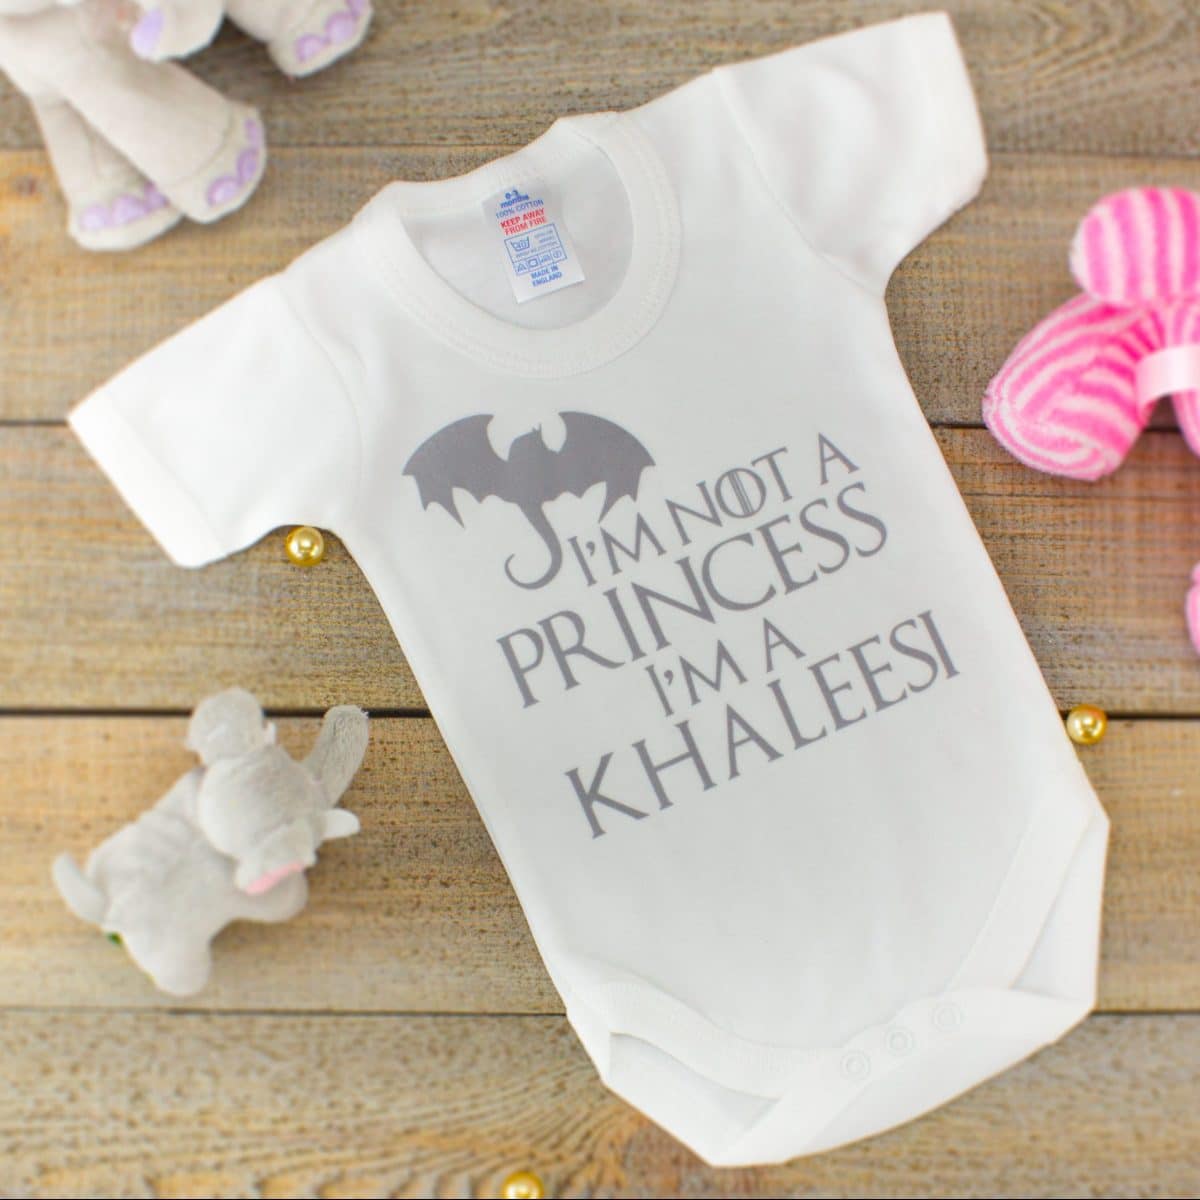 Game of Thrones Baby Bodysuit – I’m A Khalessi